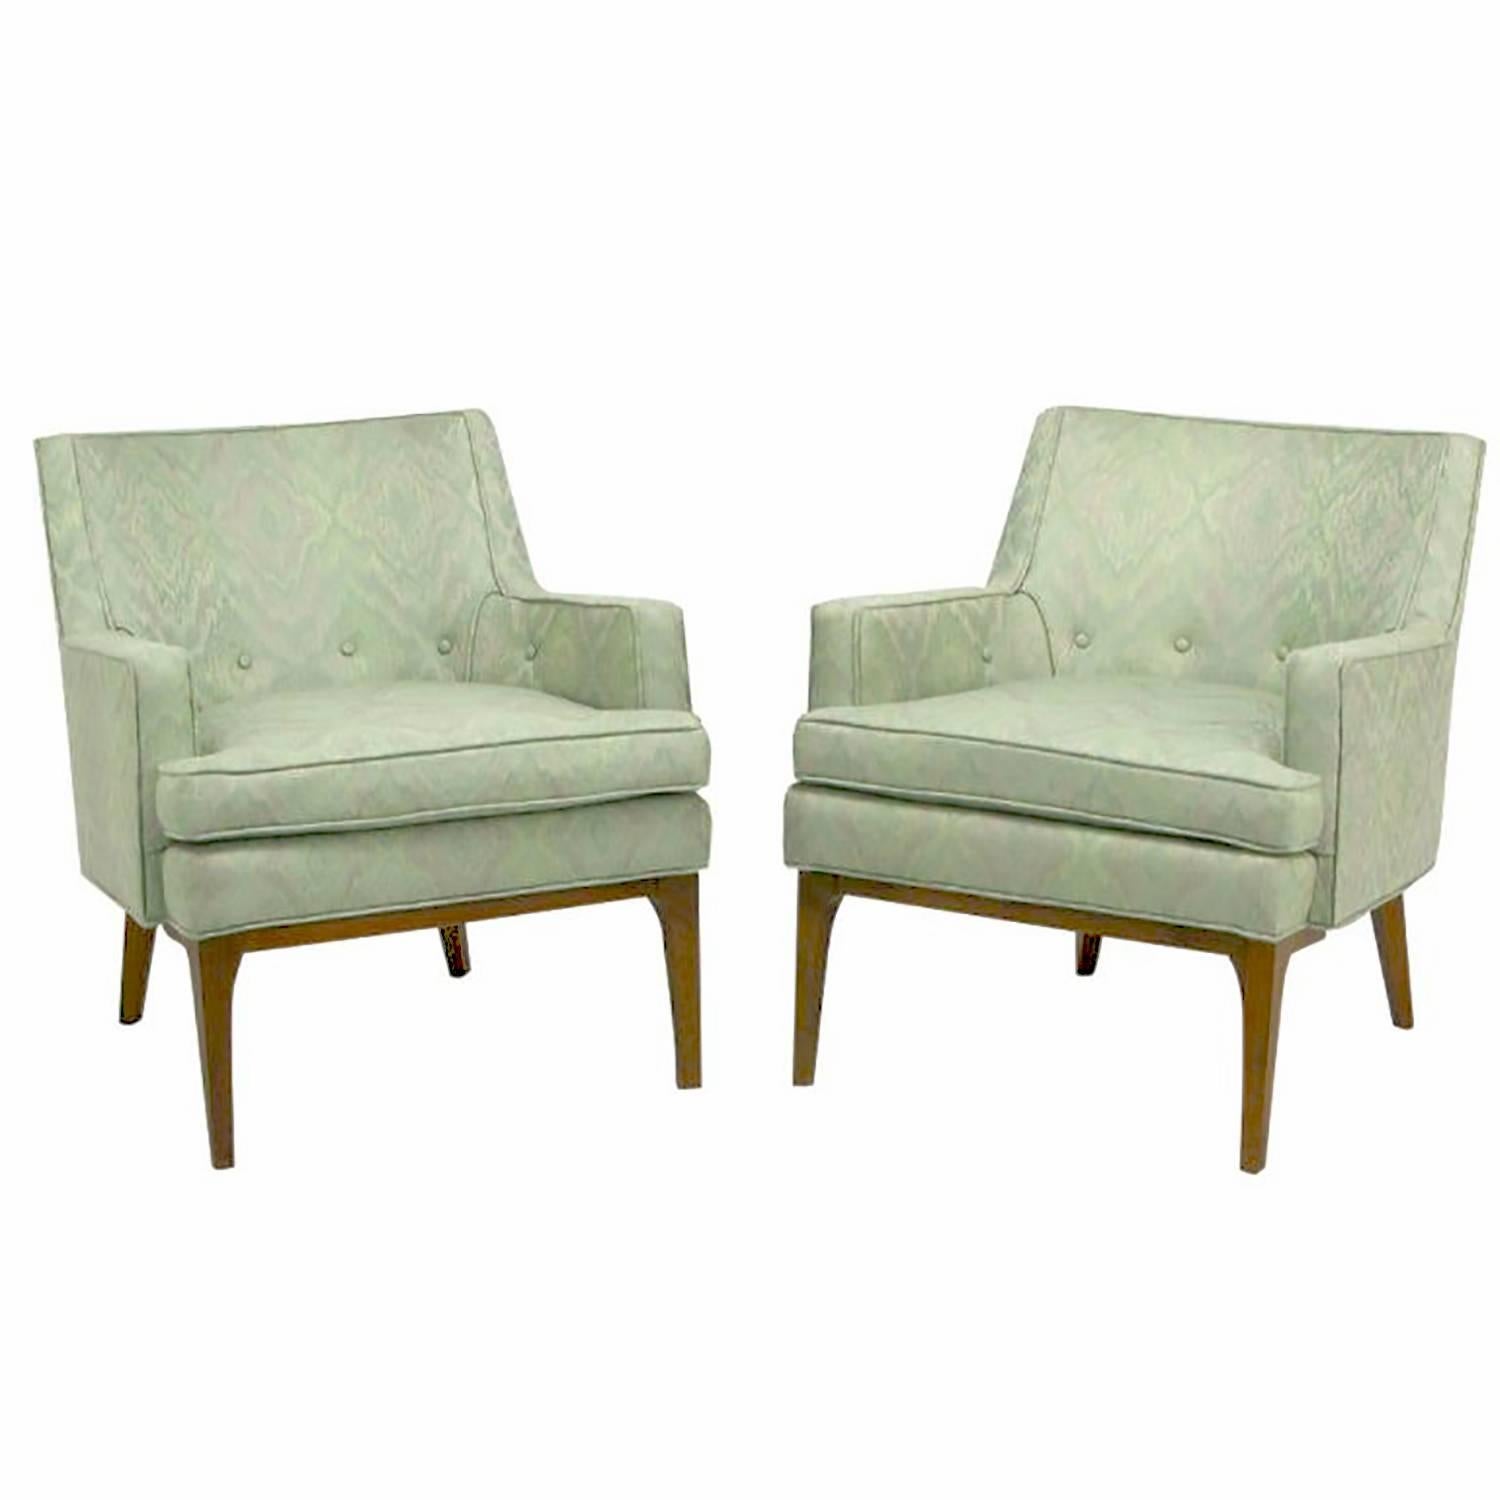 Clean lined pair of Classic club chairs in the manner of Jens Risom. Aquamarine and lavender Ikat patterned silk blend upholstery. Walnut wood legs with sculptural front apron and radiused corner legs. Loose seat cushion, and button accented back